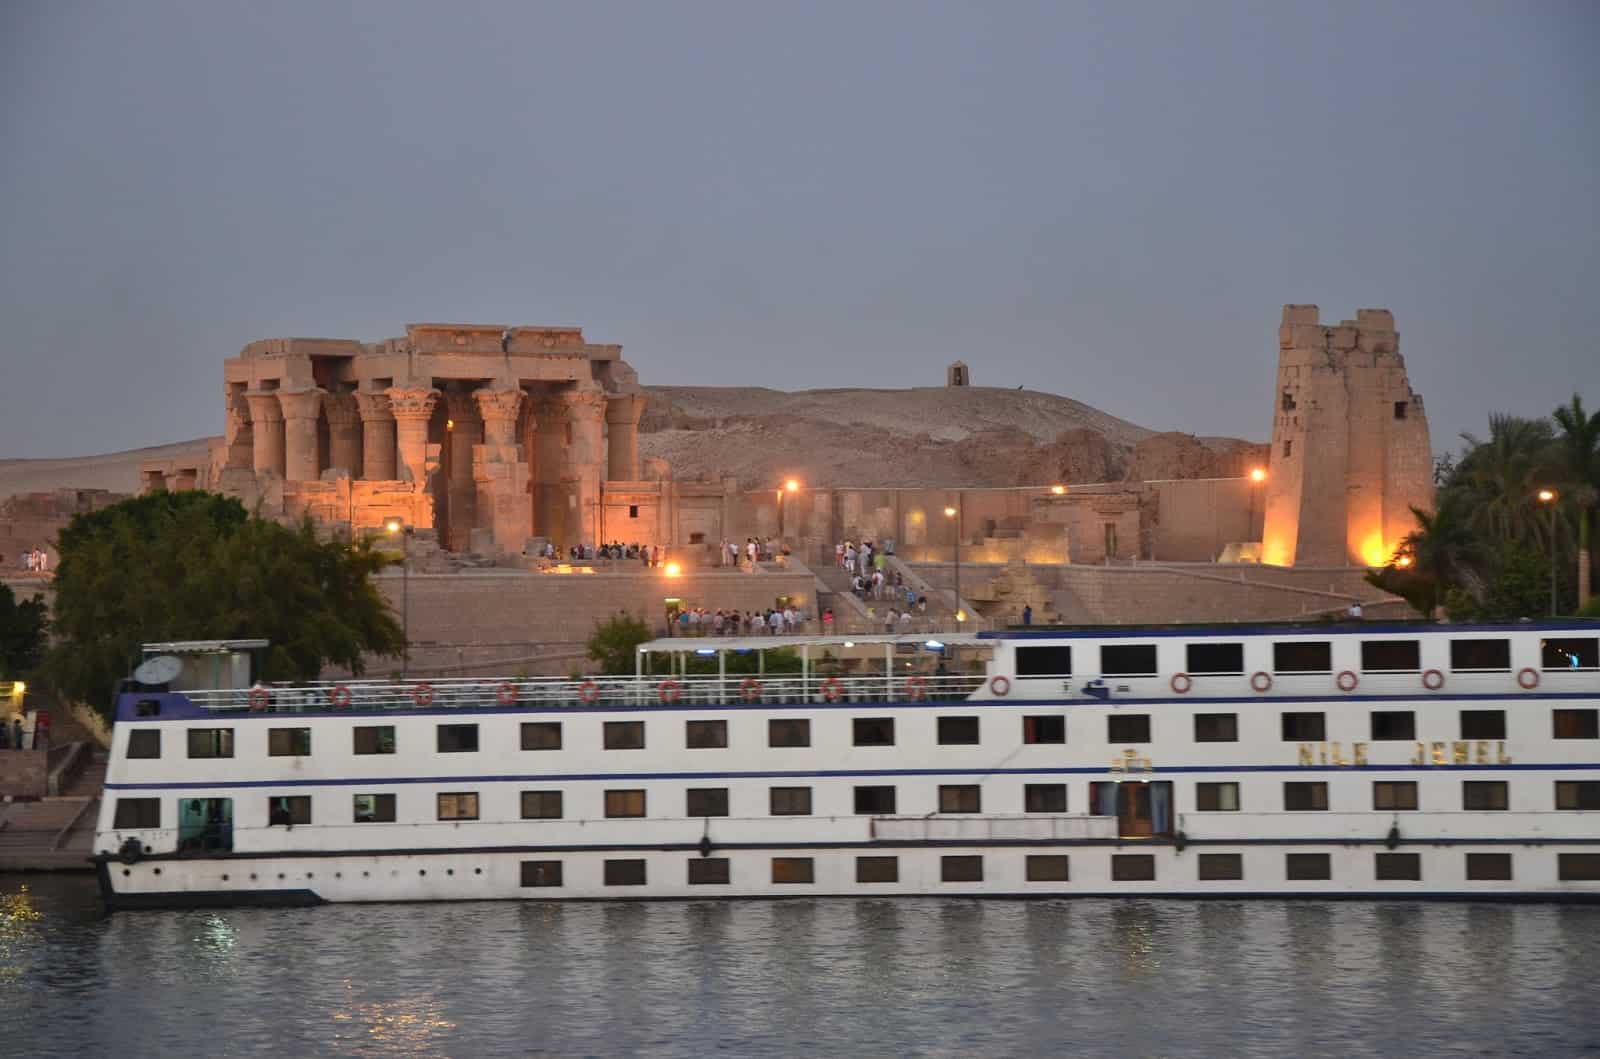 Approaching Kom Ombo on the Nile in Egypt